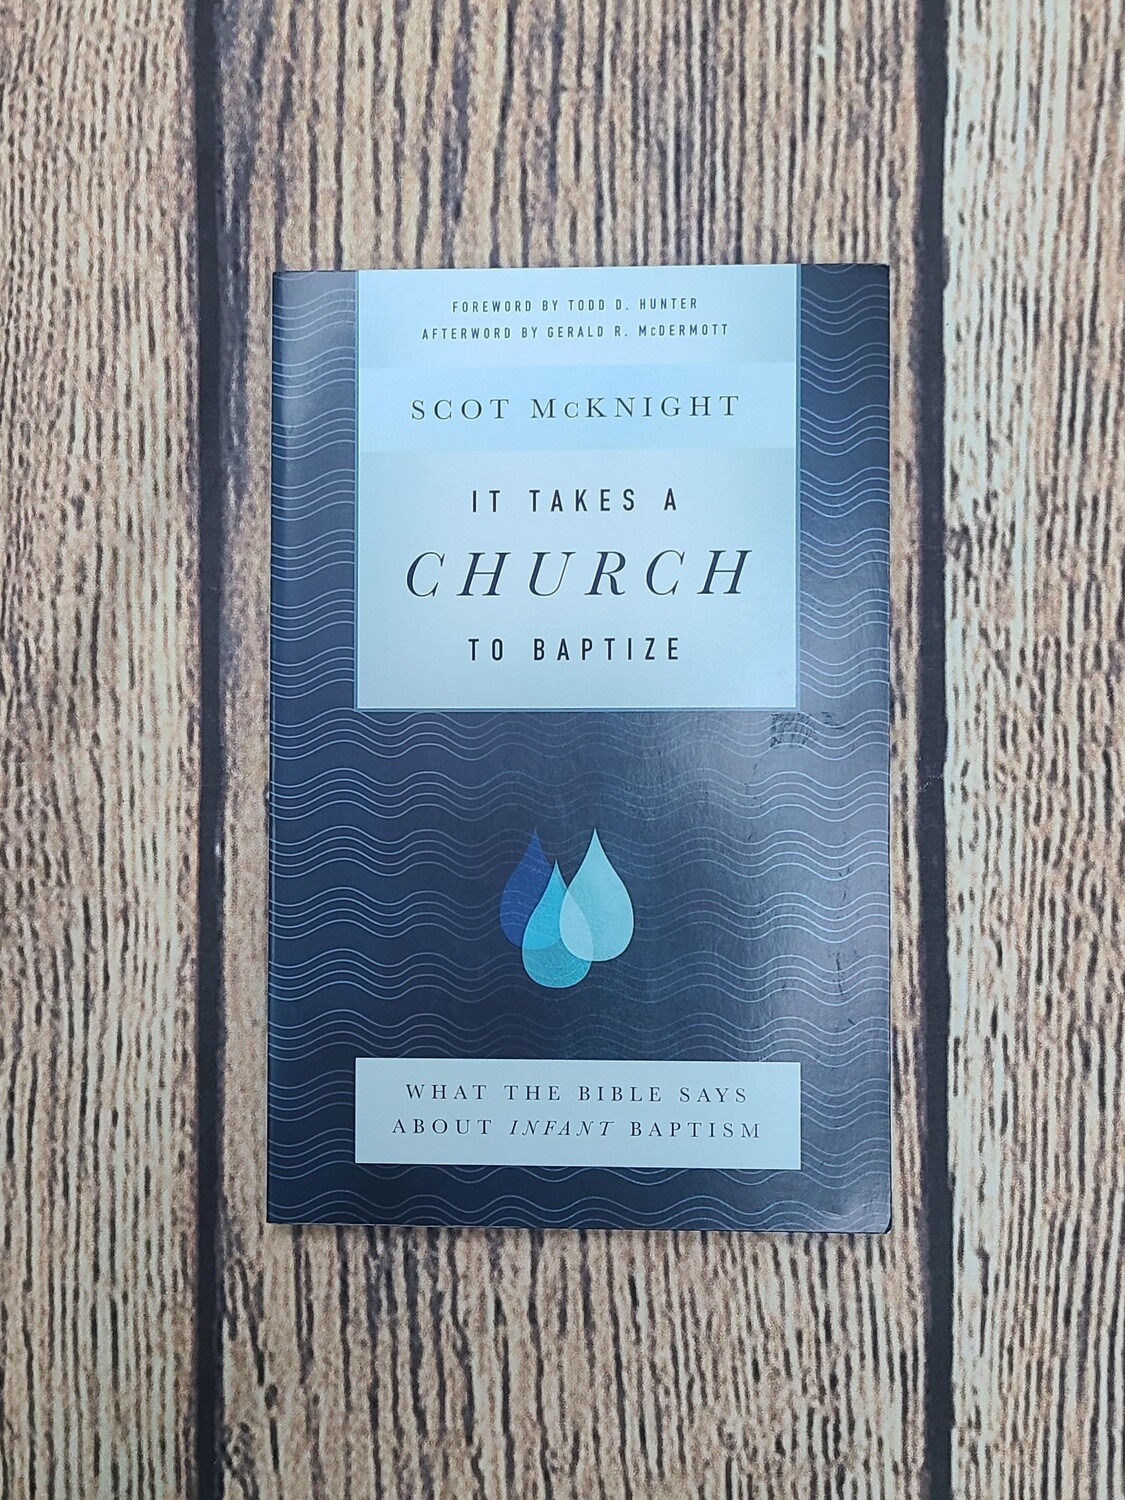 It Takes a Church to Baptize by Scot McKnight